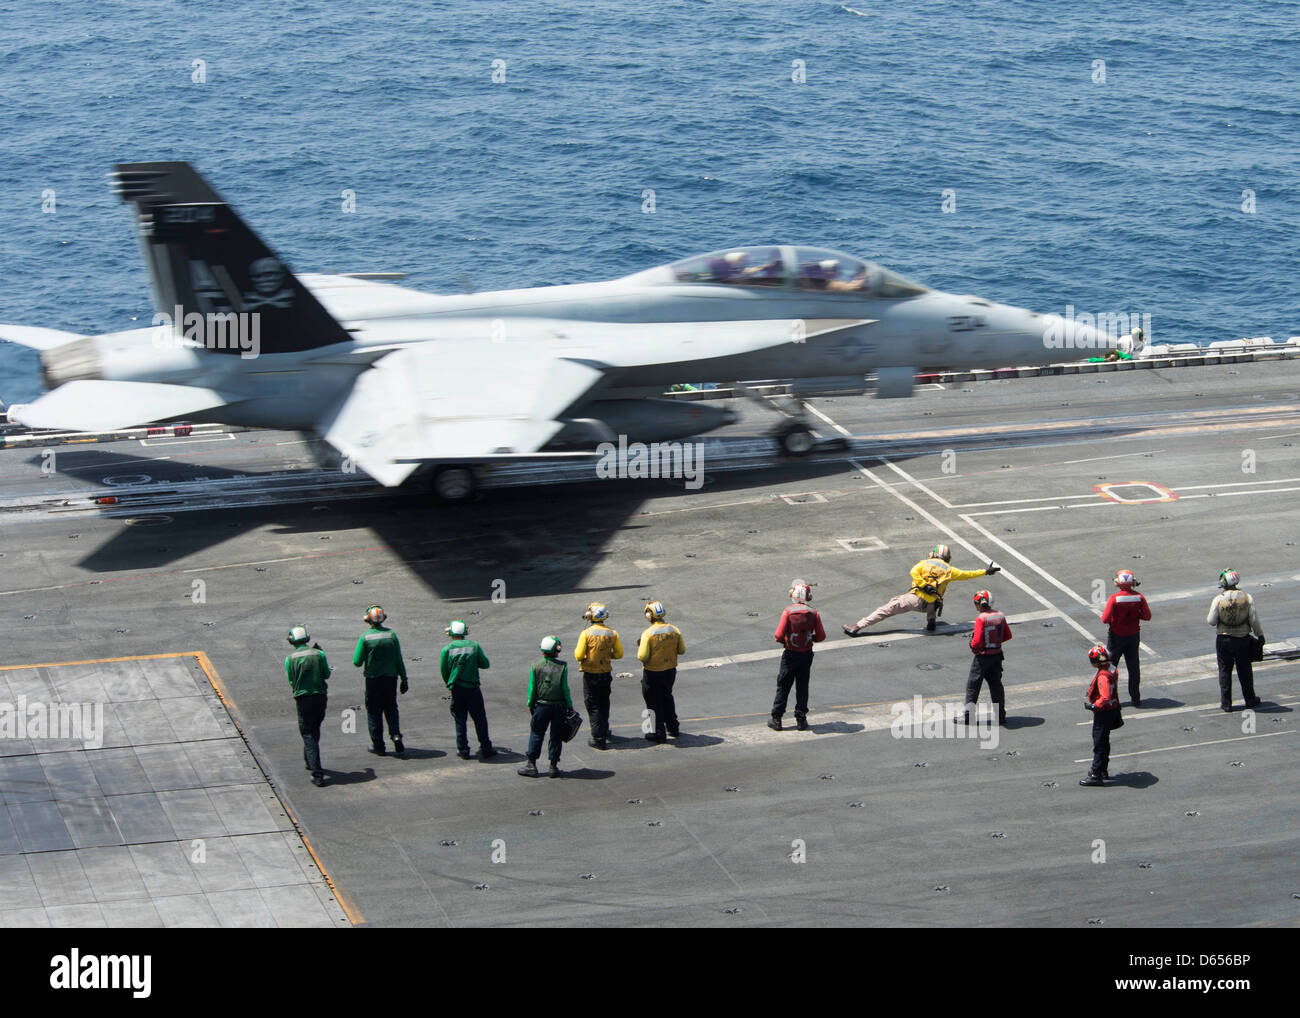 a-us-navy-fa-18c-hornet-launches-from-the-flight-deck-of-aircraft-D656BP.jpg